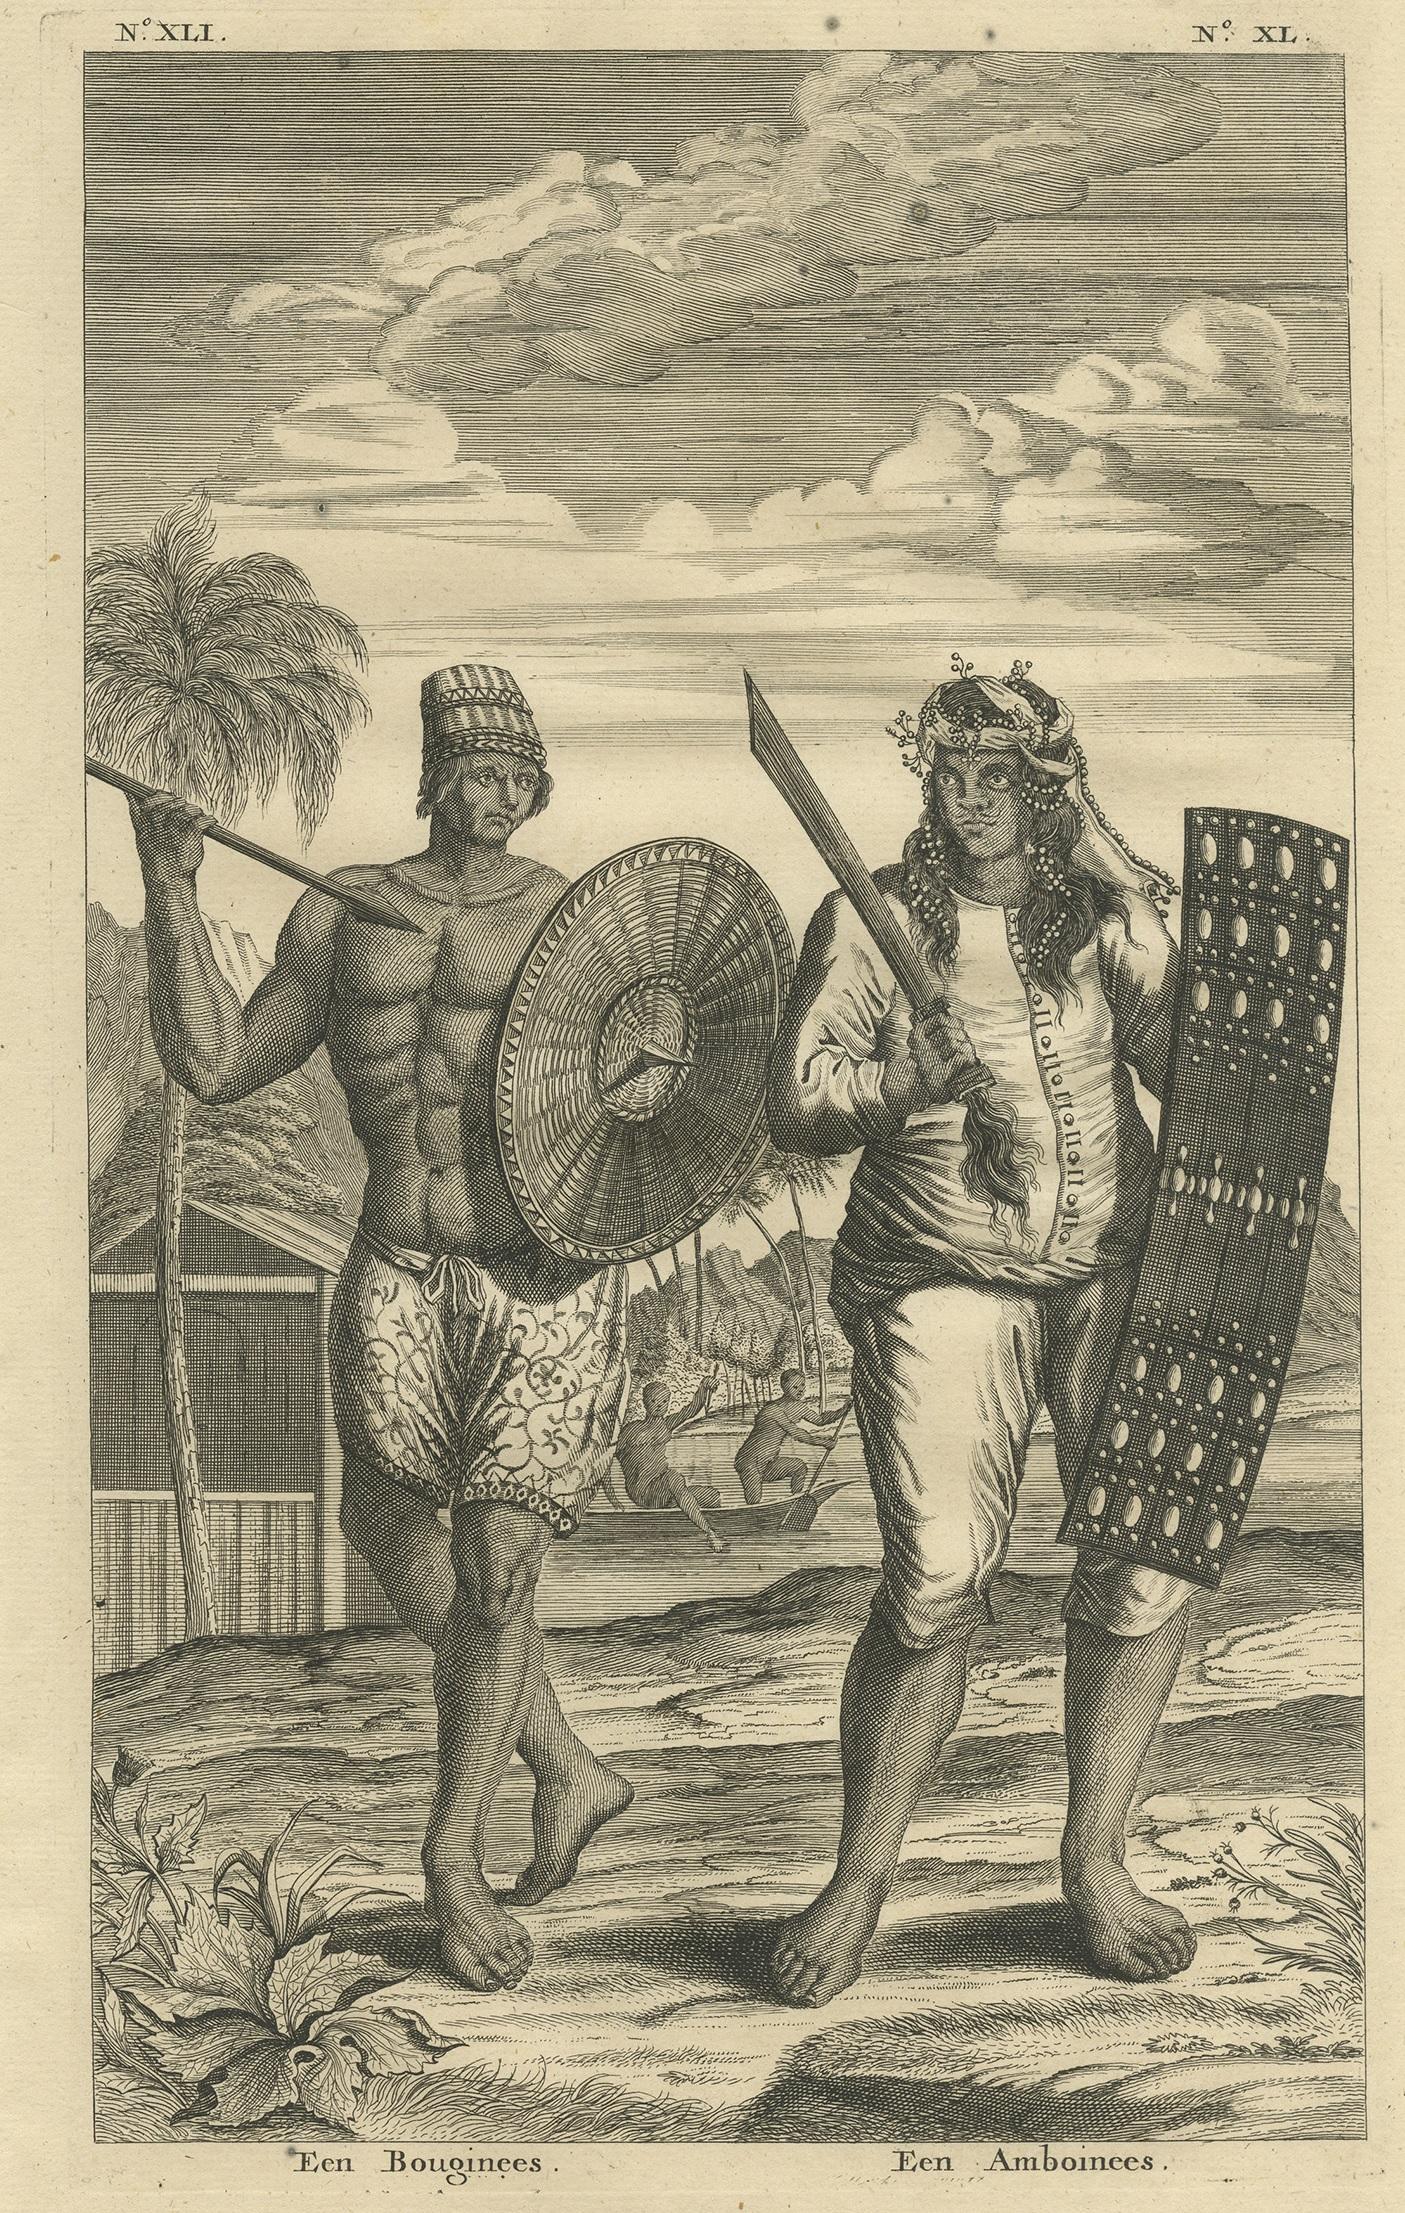 Antique print titled 'Een Bouginees - een Amboinees'. This plate shows a Buginese- and Ambonese Man. The Buginese people are an ethnic group - the most numerous of the three major linguistic and ethnic groups of South Sulawesi, in the southwestern